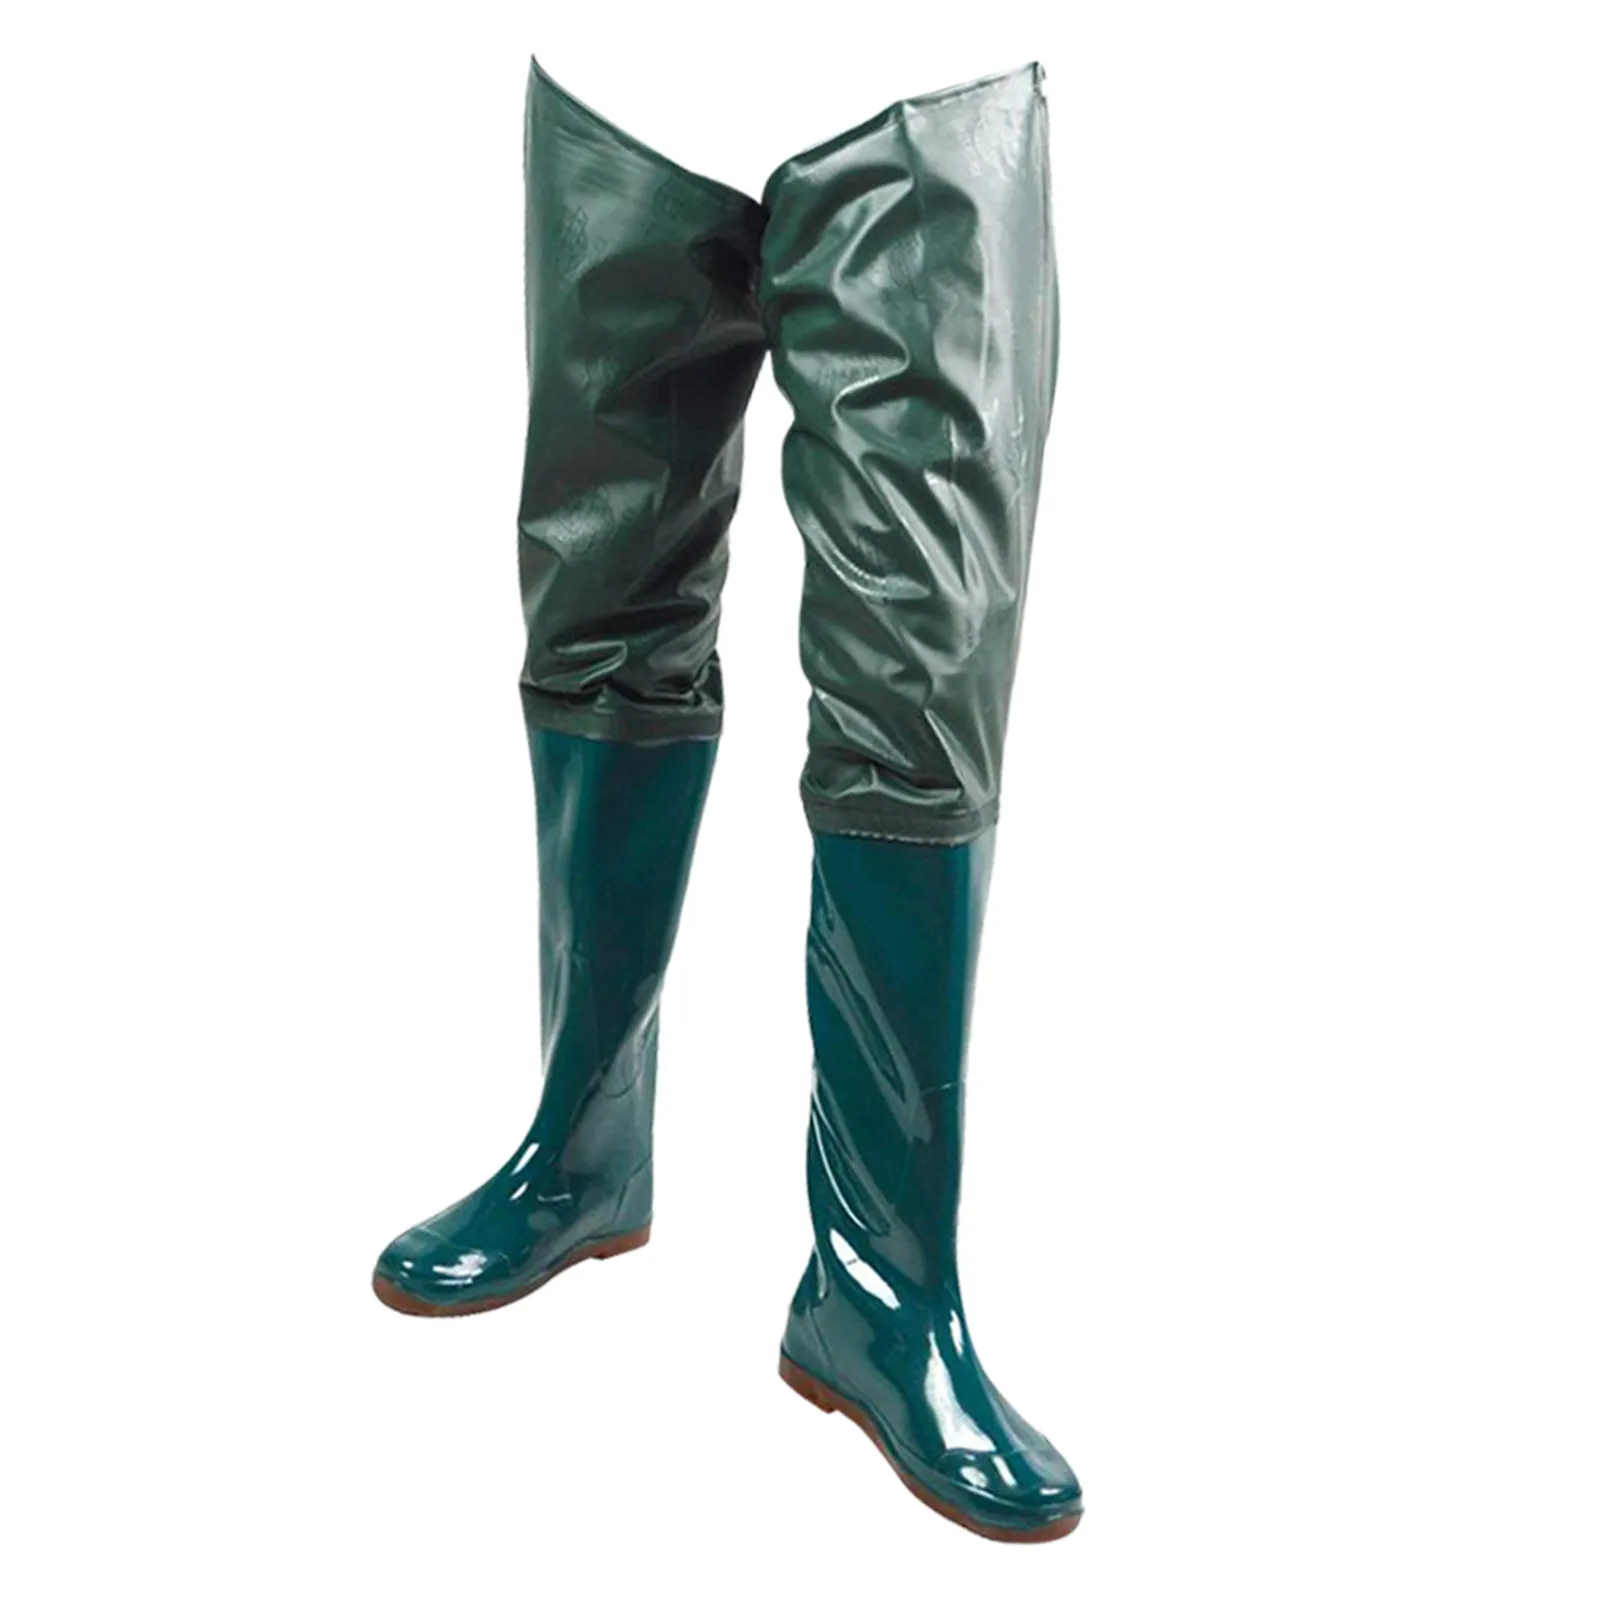 Extended tube wading trousers rice-planting boots anti-slip fishing boots trousers knee-high half-length trousers